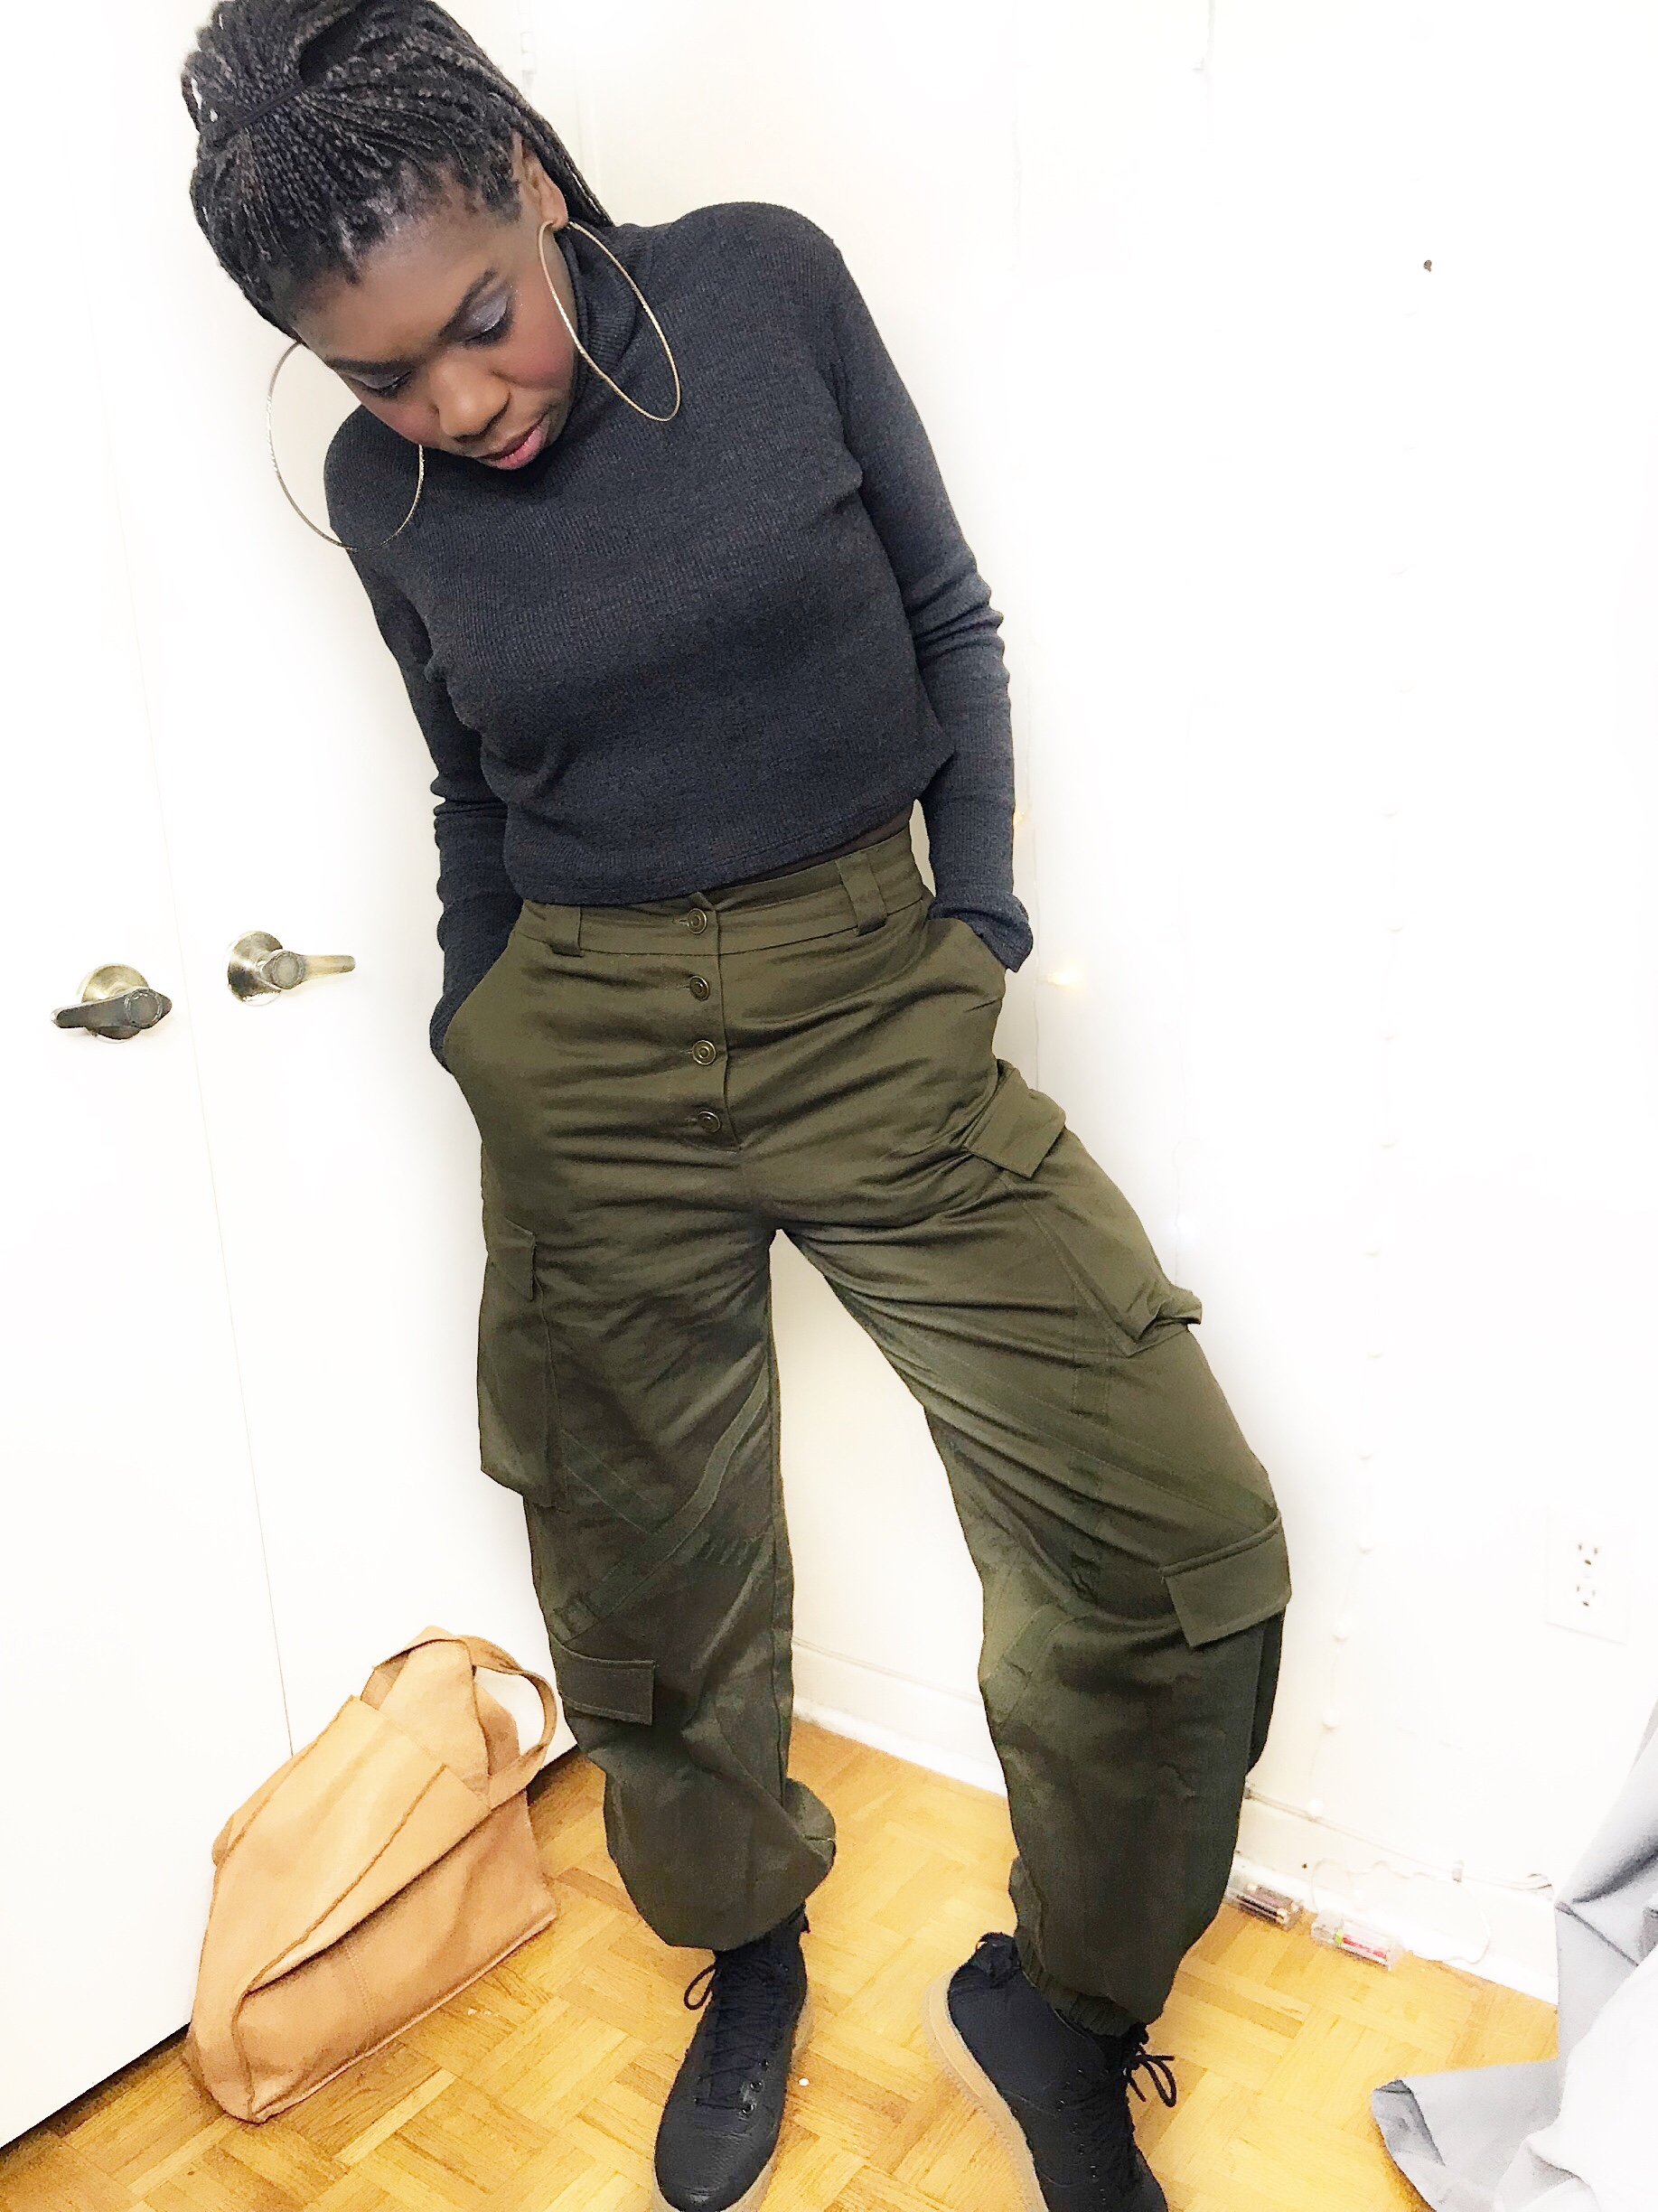 Telly poses in her olive green combat pants